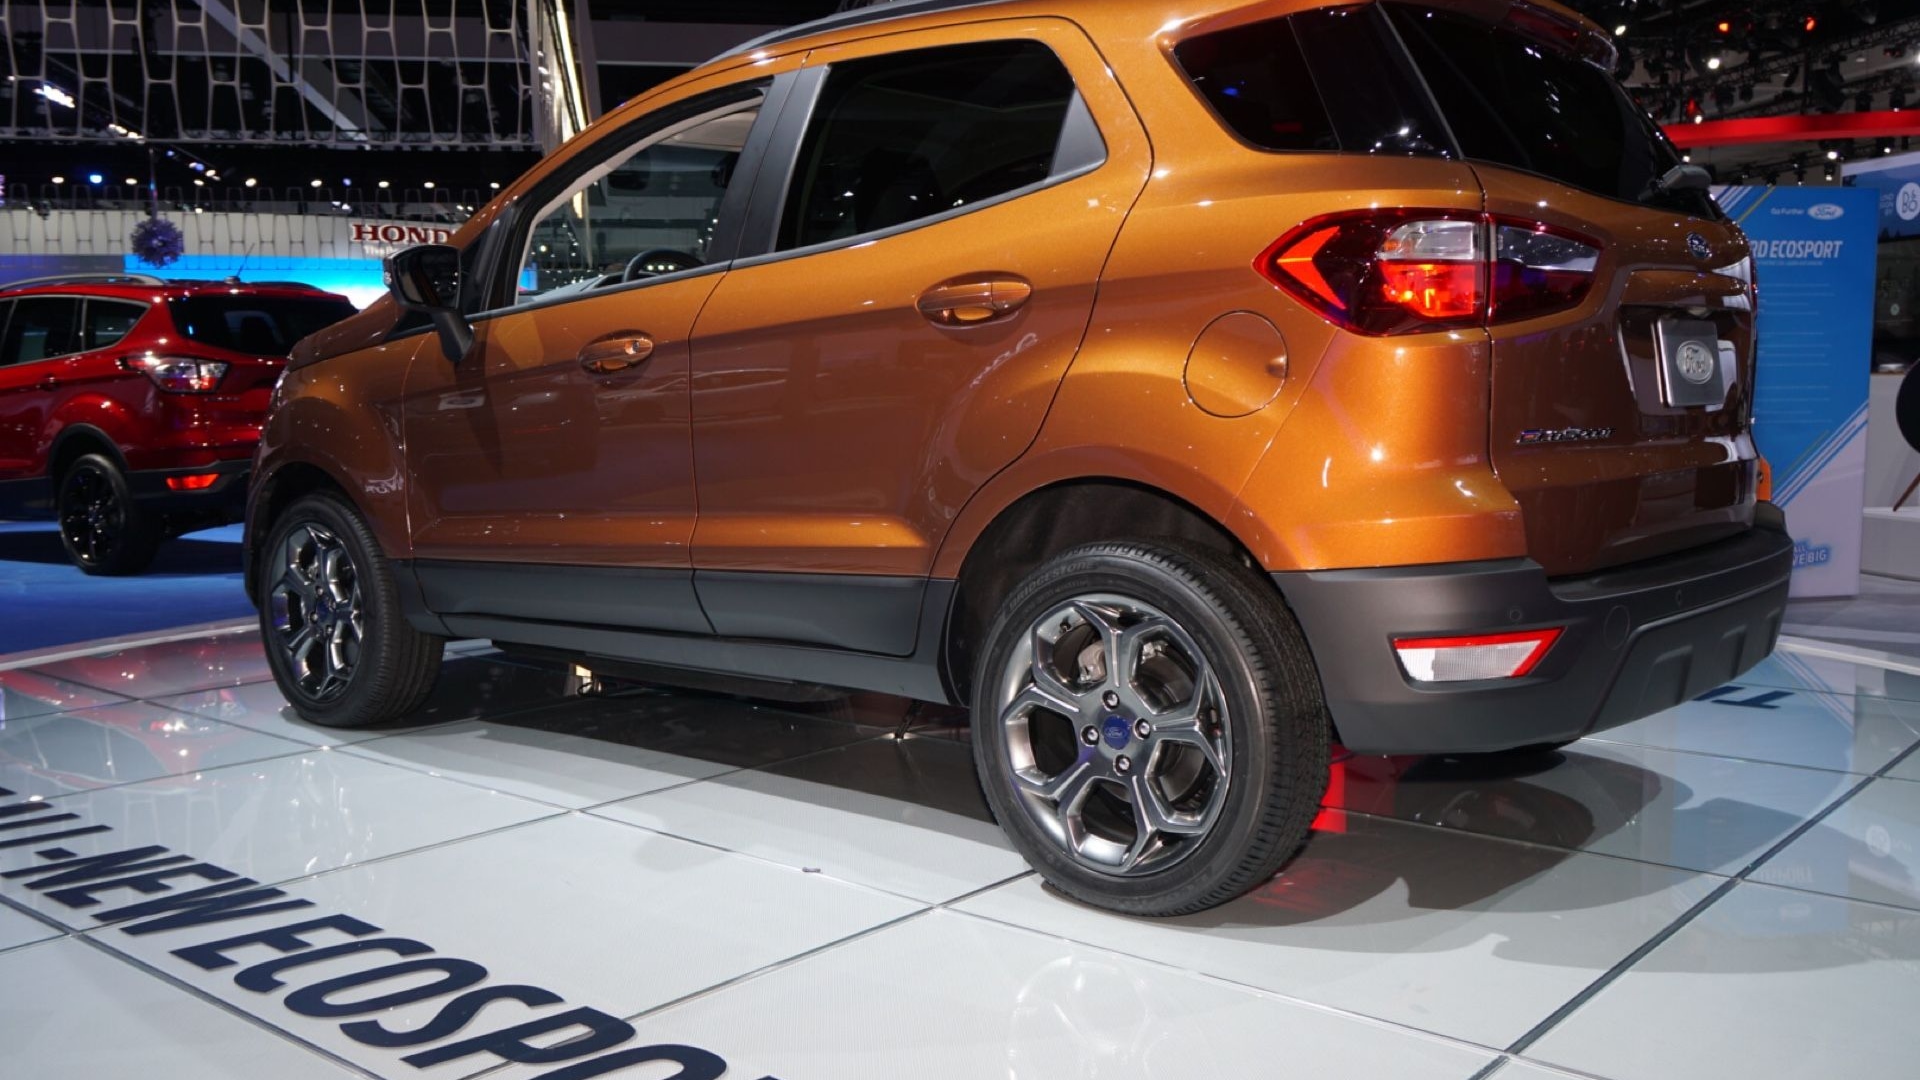  Ford  Ecosport subcompact  SUV  finally debuts in US